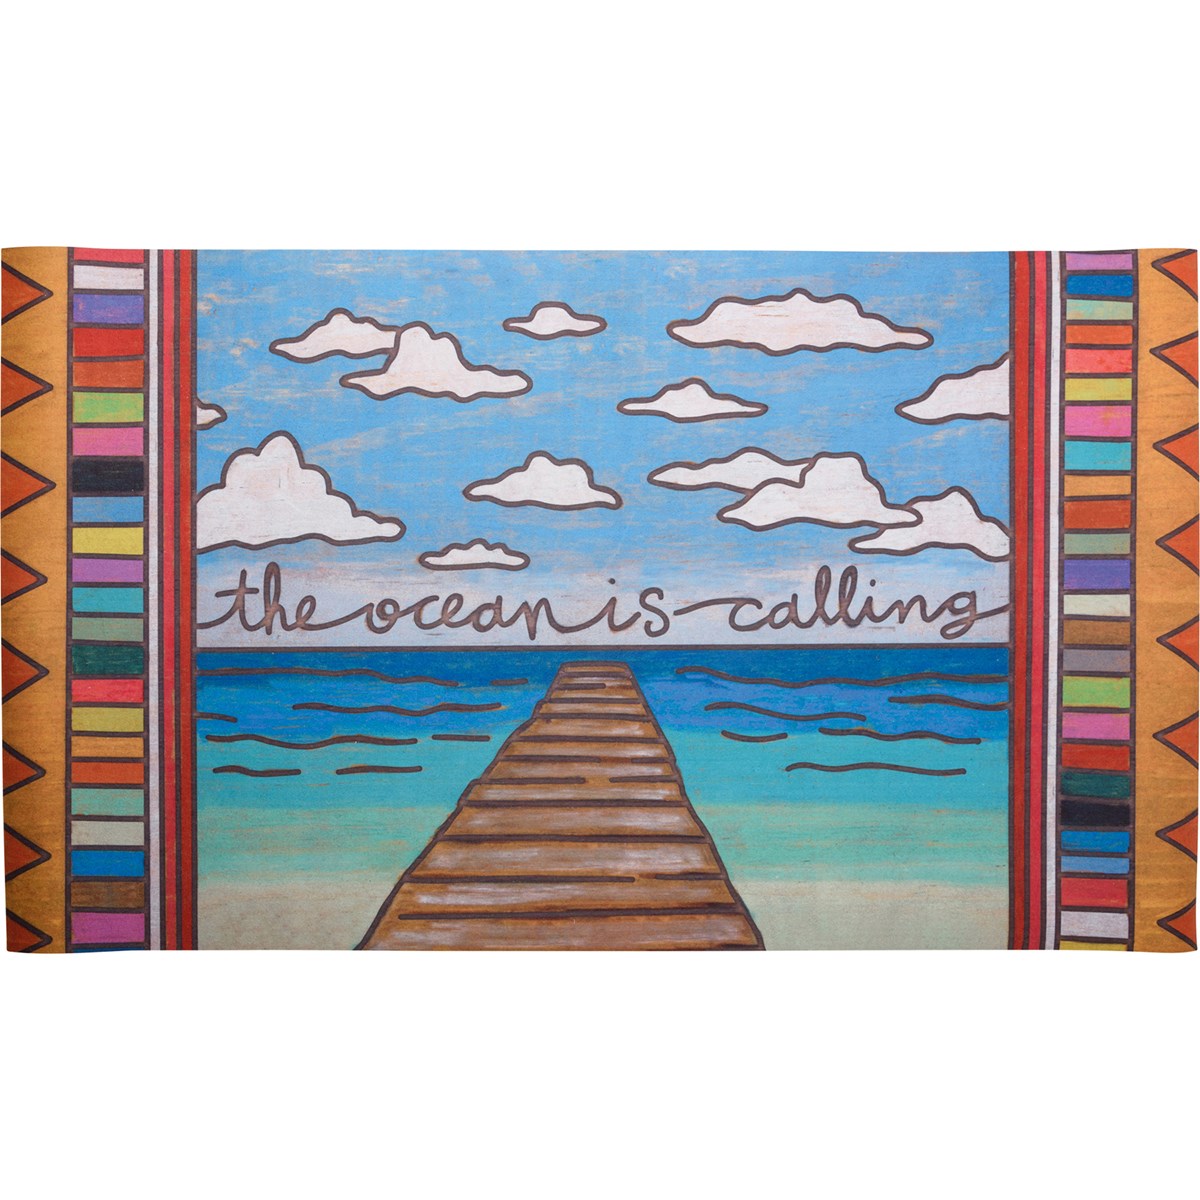 Rug - The Ocean Is Calling - 34" x 20" - Polyester, PVC skid-resistant backing